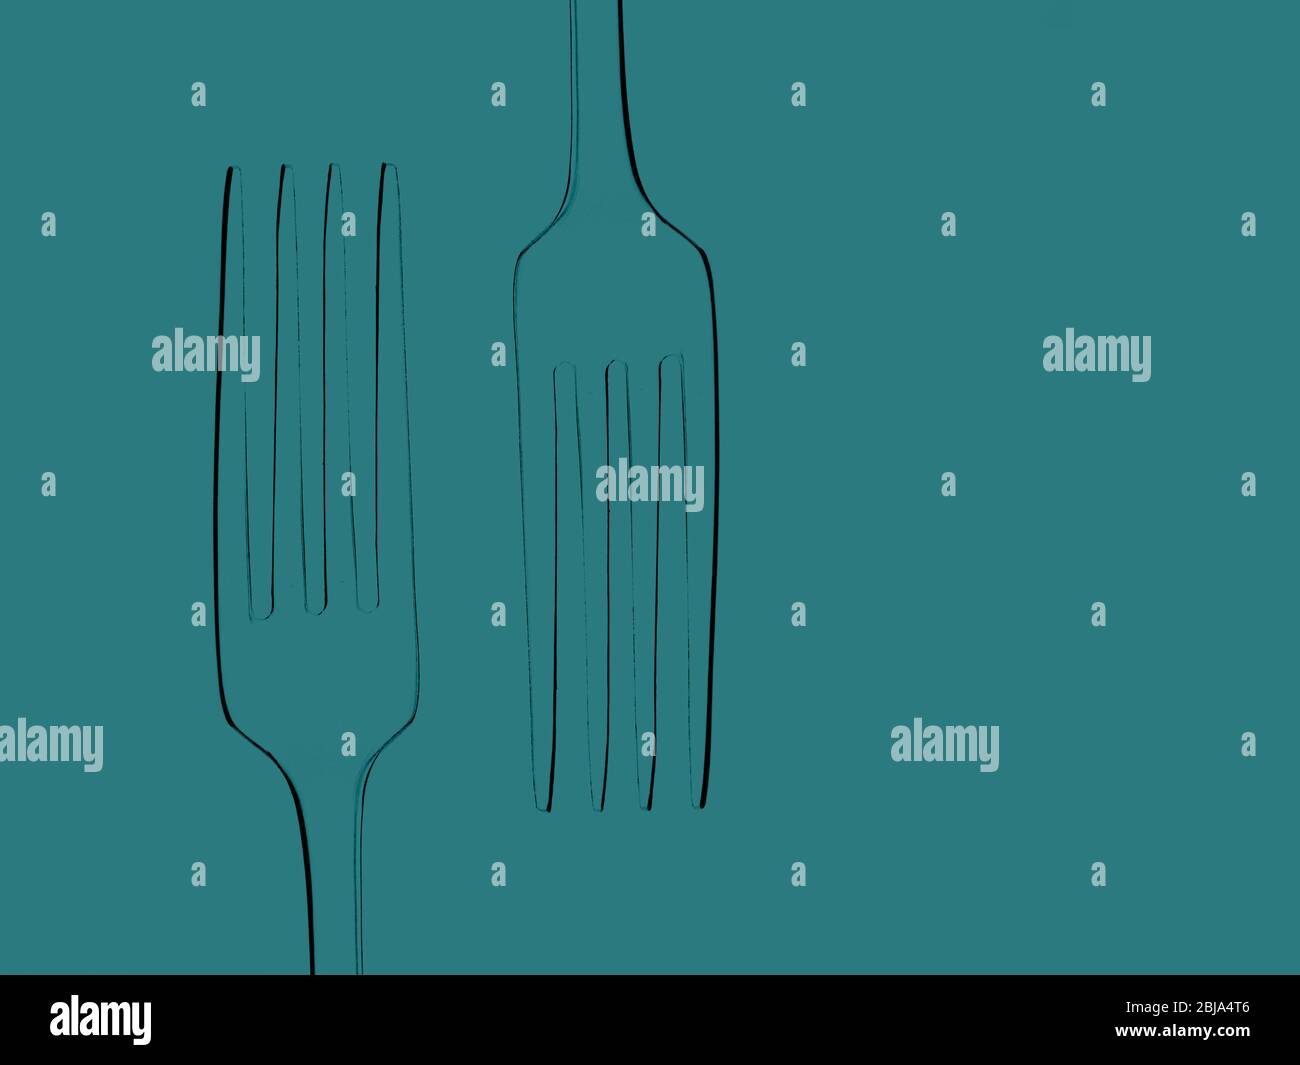 Two dining forks, photographed silhouette outlines on teal green plain background. Stock Photo